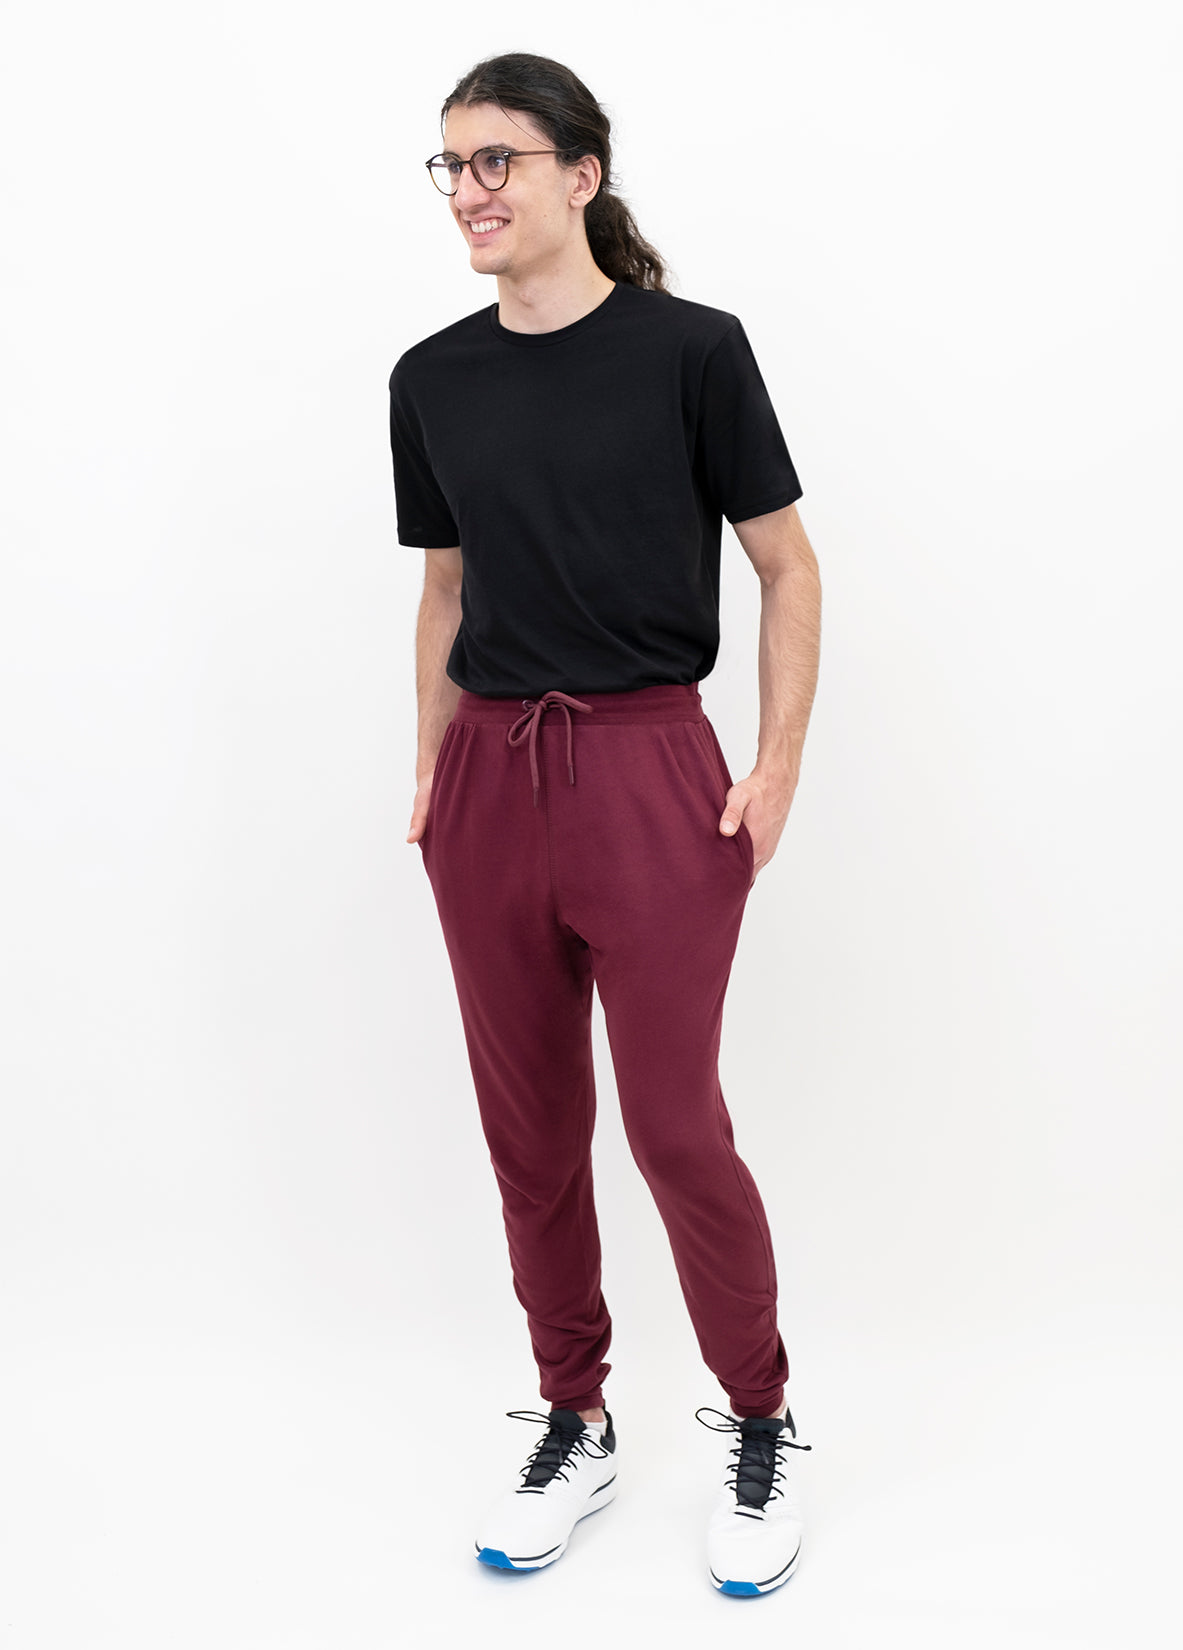 Mom Style: How to Wear Joggers For Every Day - Merrick's Art